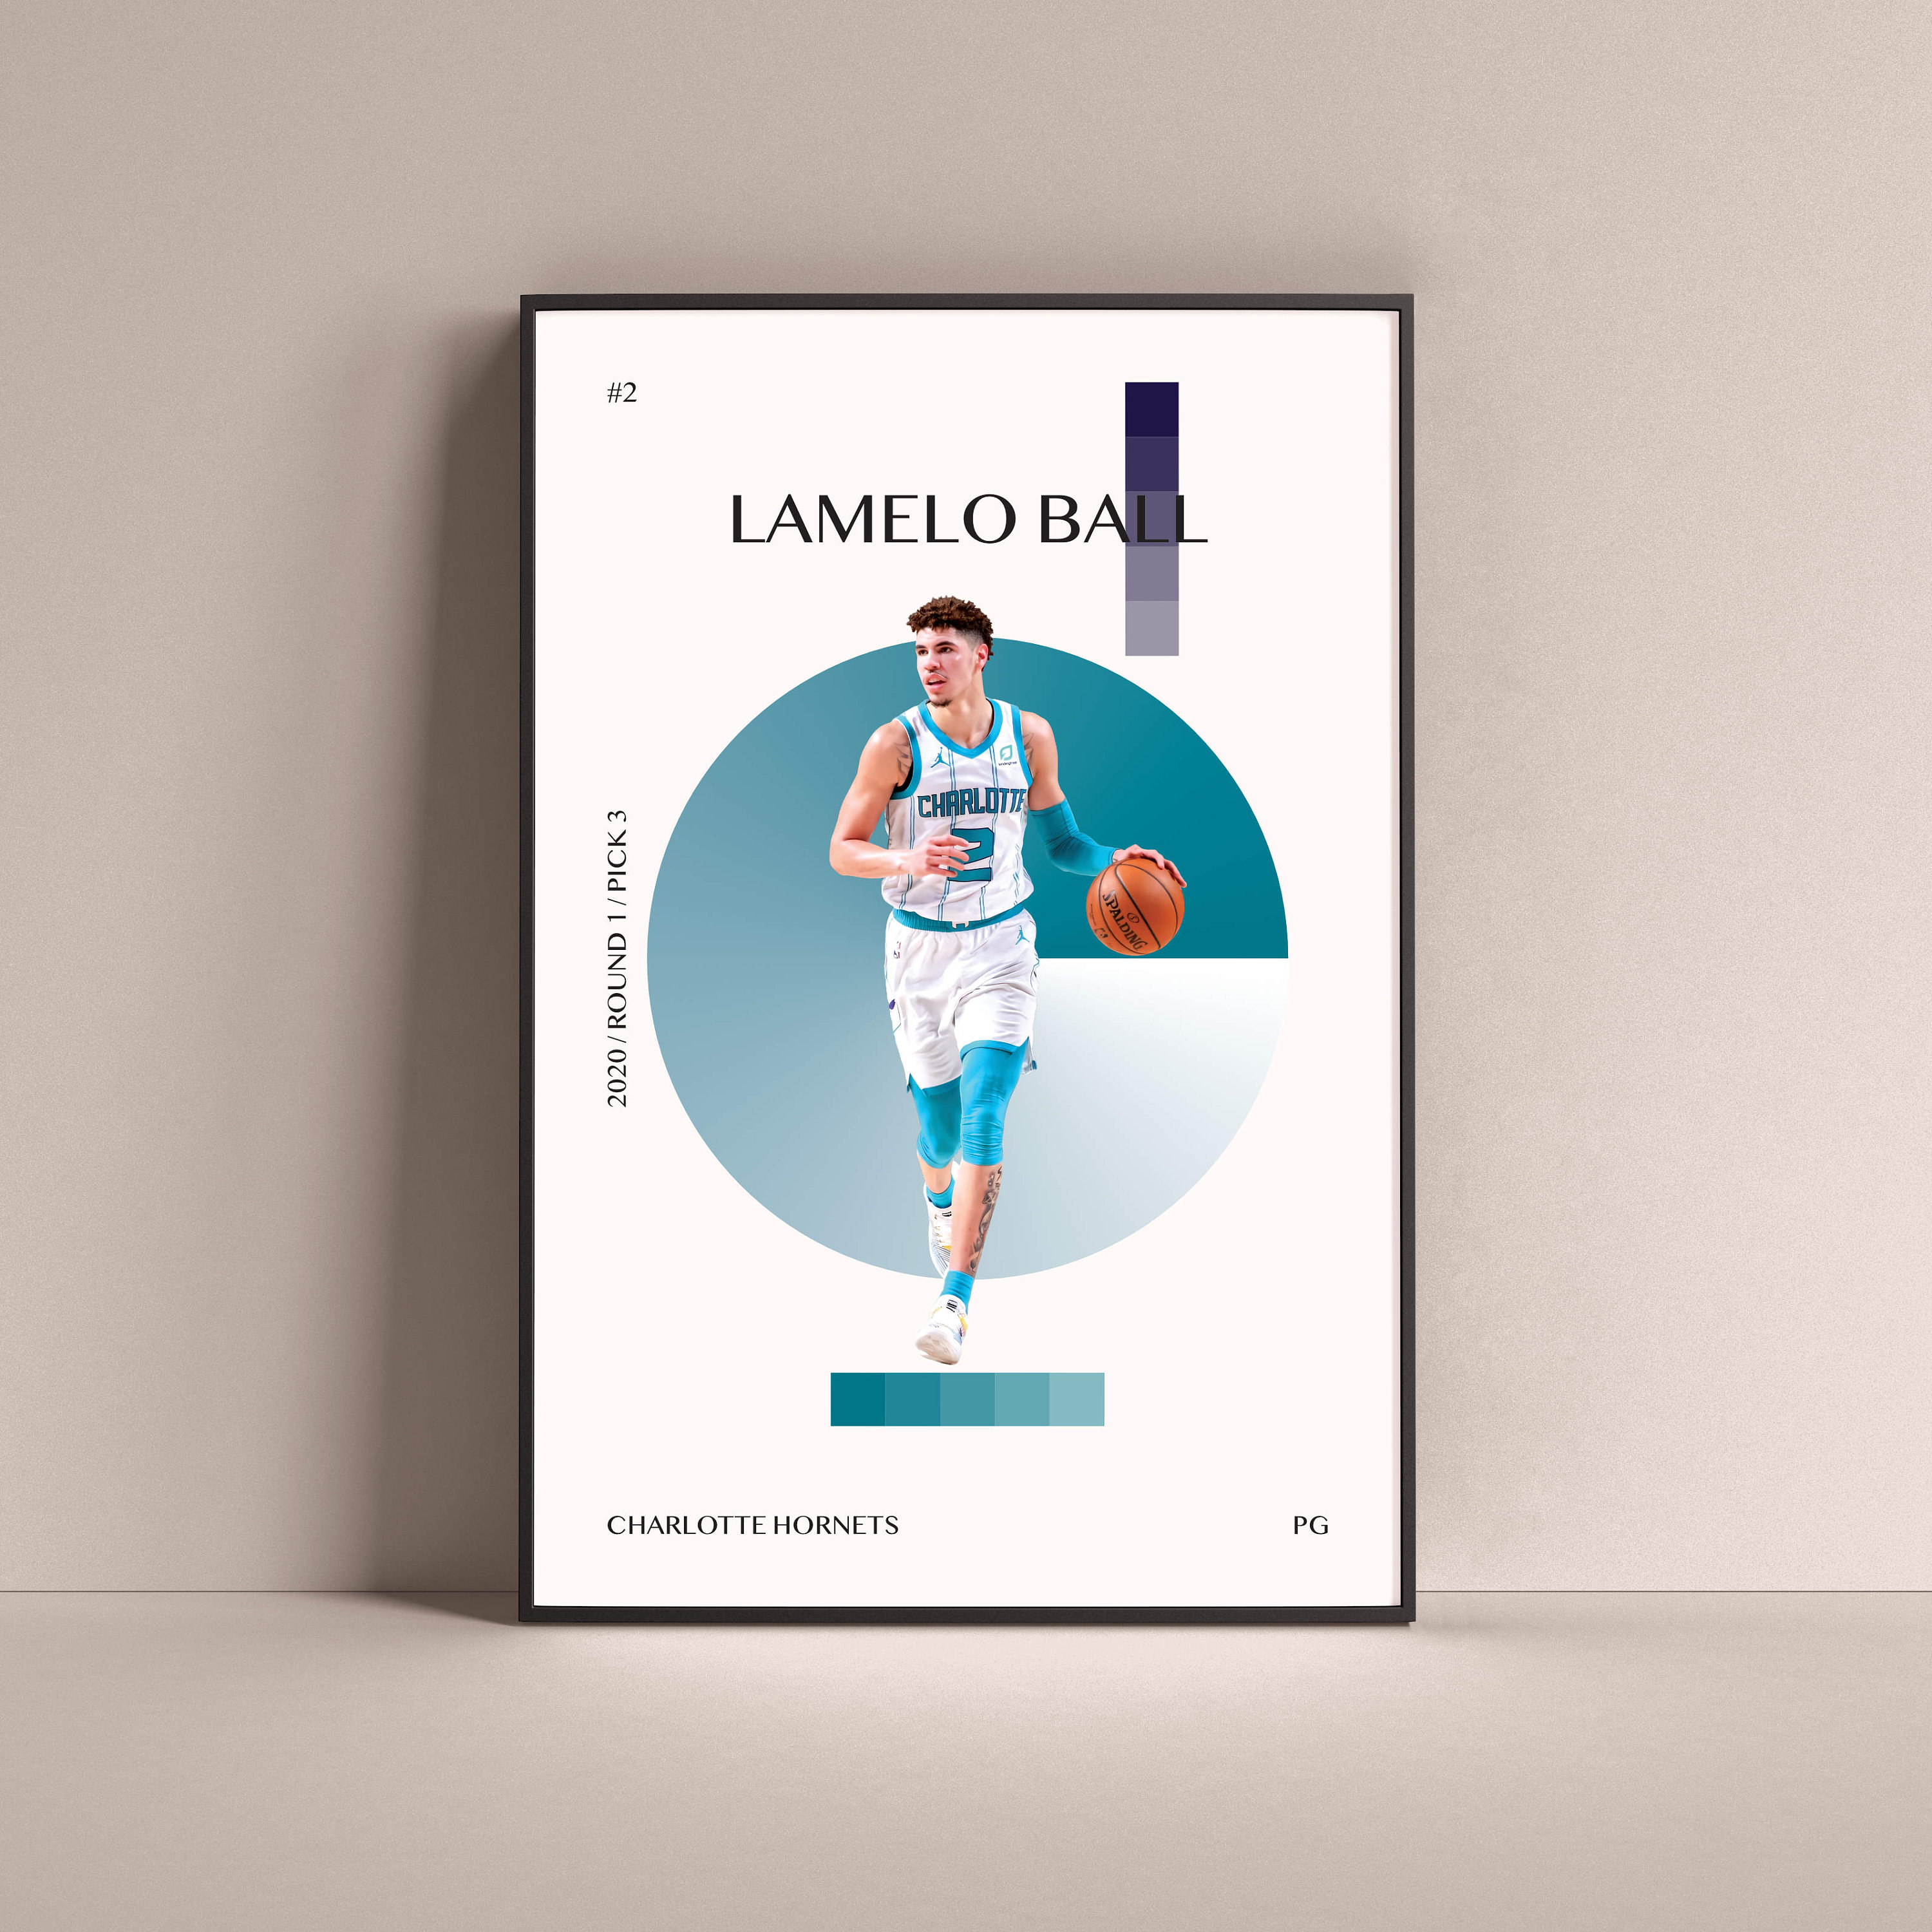  LaMelo LaFrance Ball Poster 1 Wall Art Canvas Print Poster Home  Bathroom Bedroom Office Living Room Decor Canvas Poster Unframe:  16x24inch(40x60cm): Posters & Prints